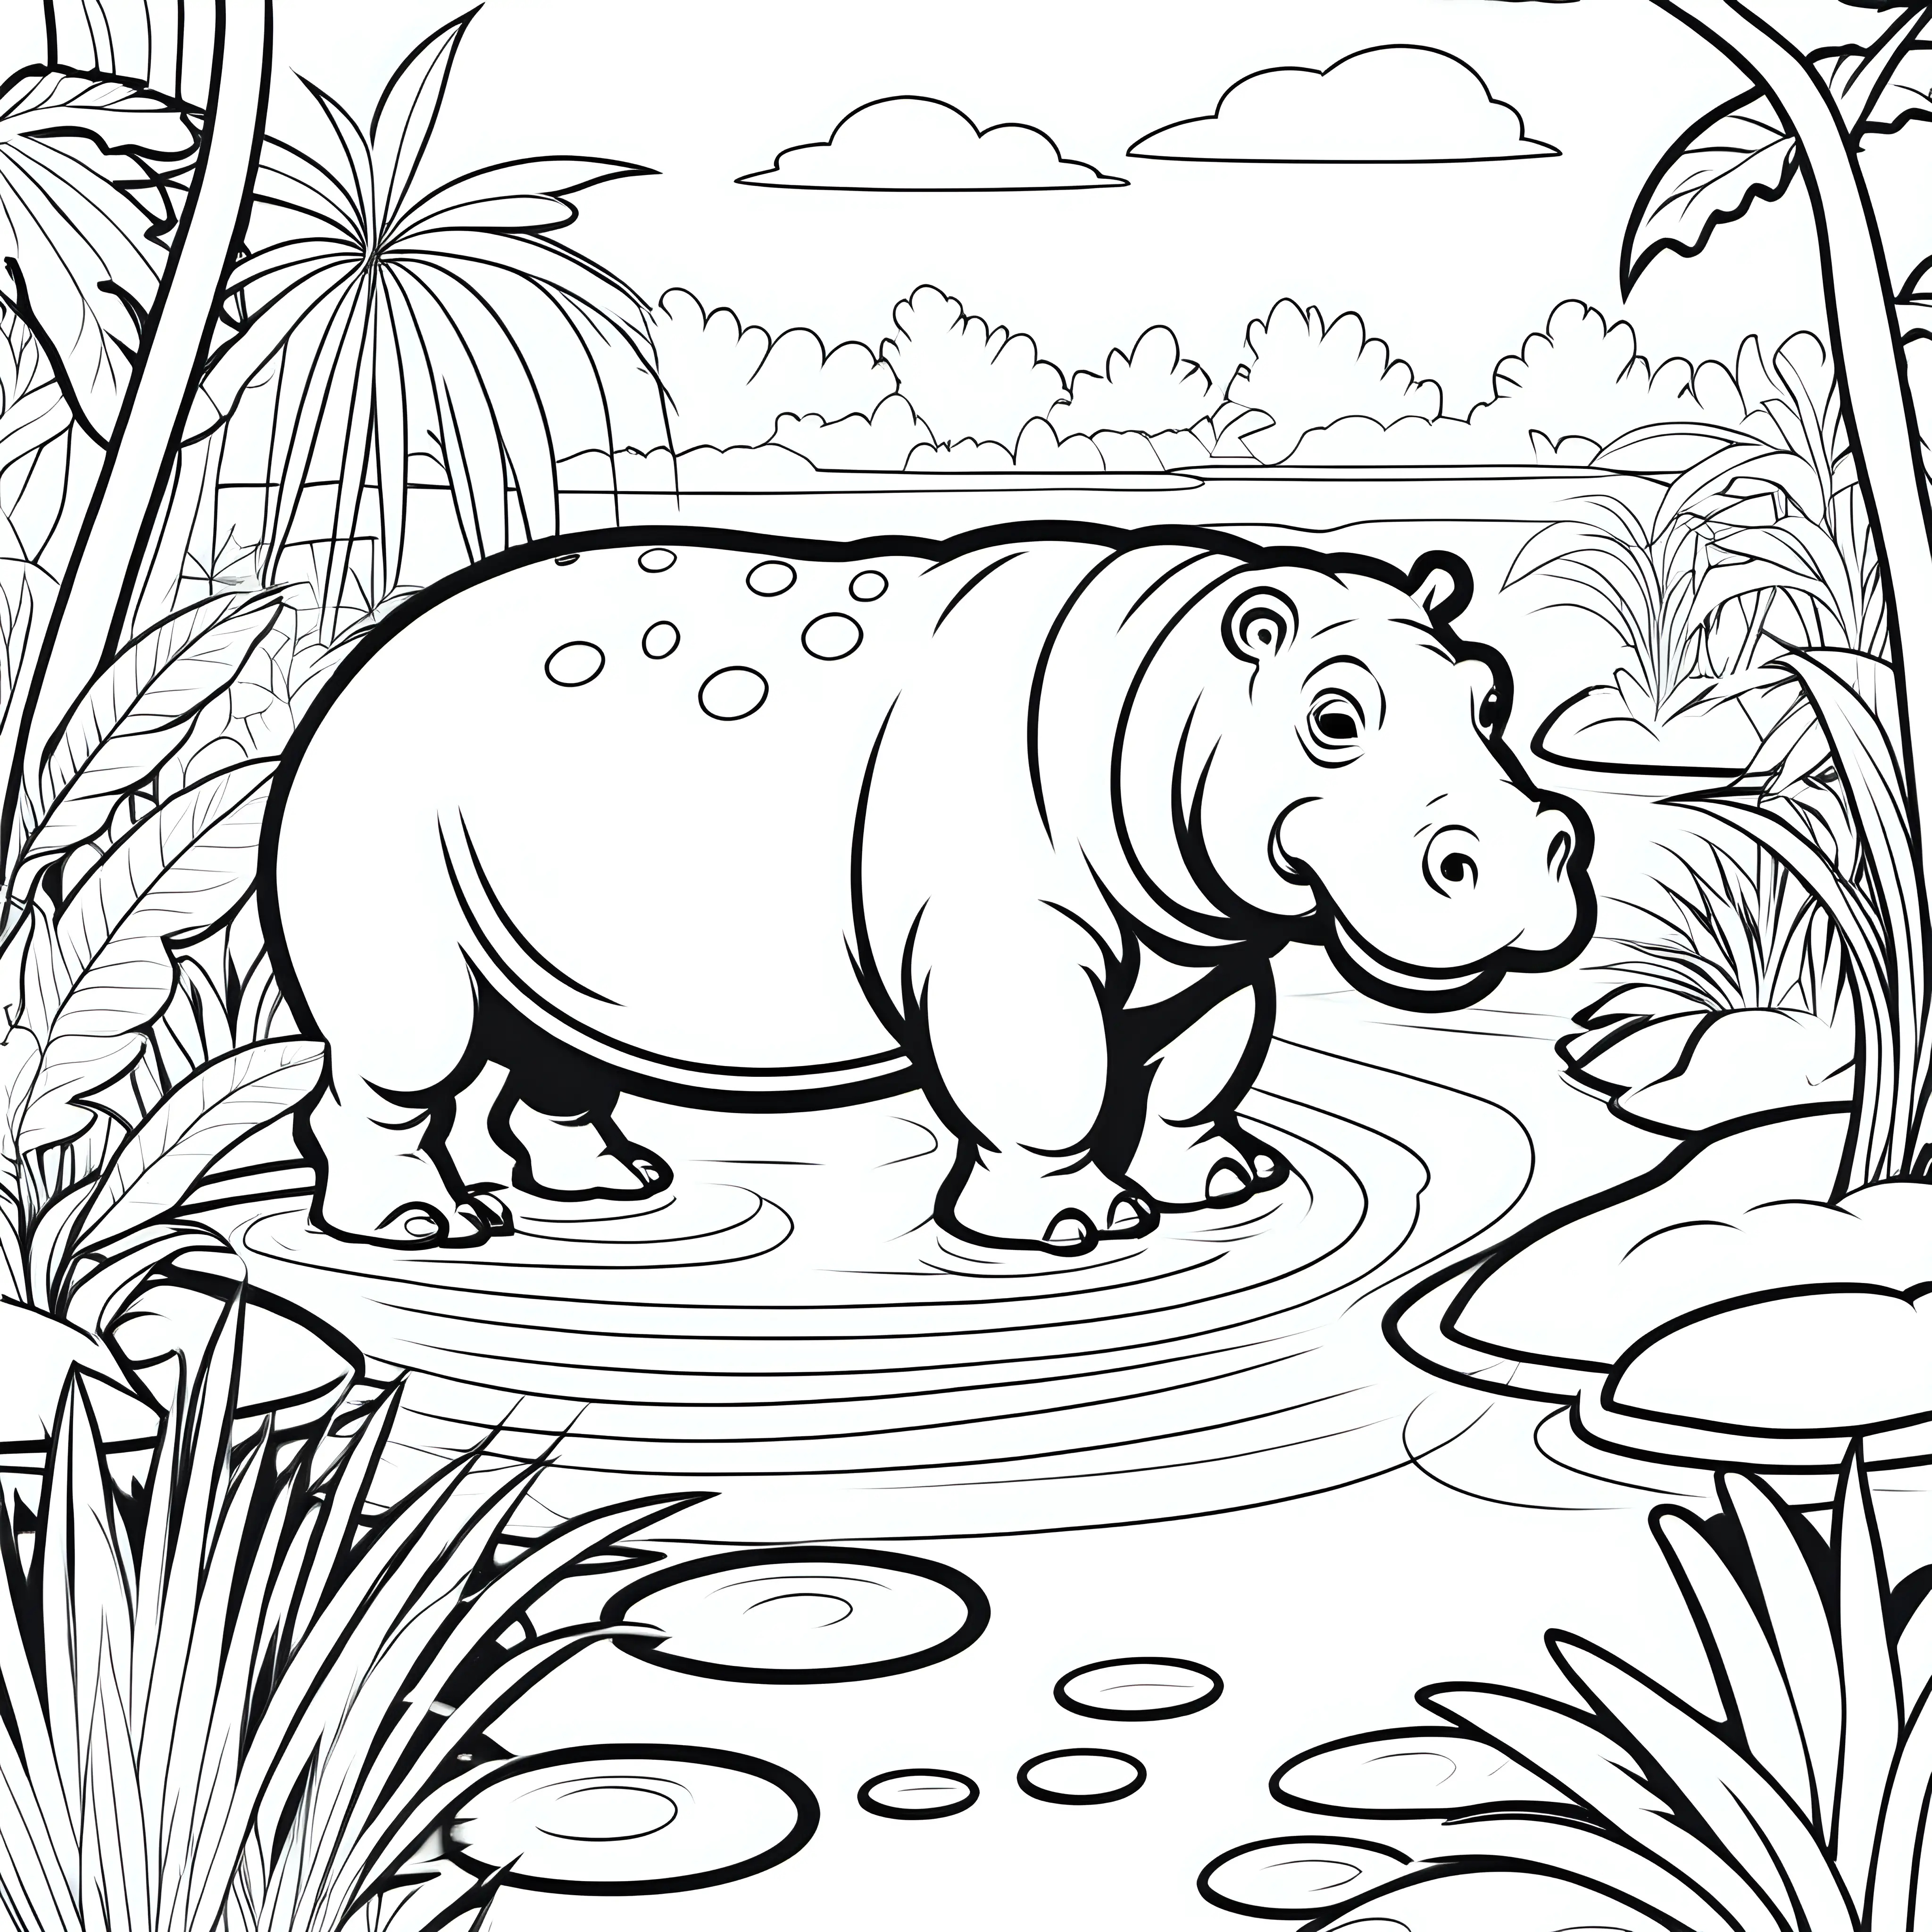 Coloring page for kids, Hippopotamus in Garden of Eden close to a water body, clean line art